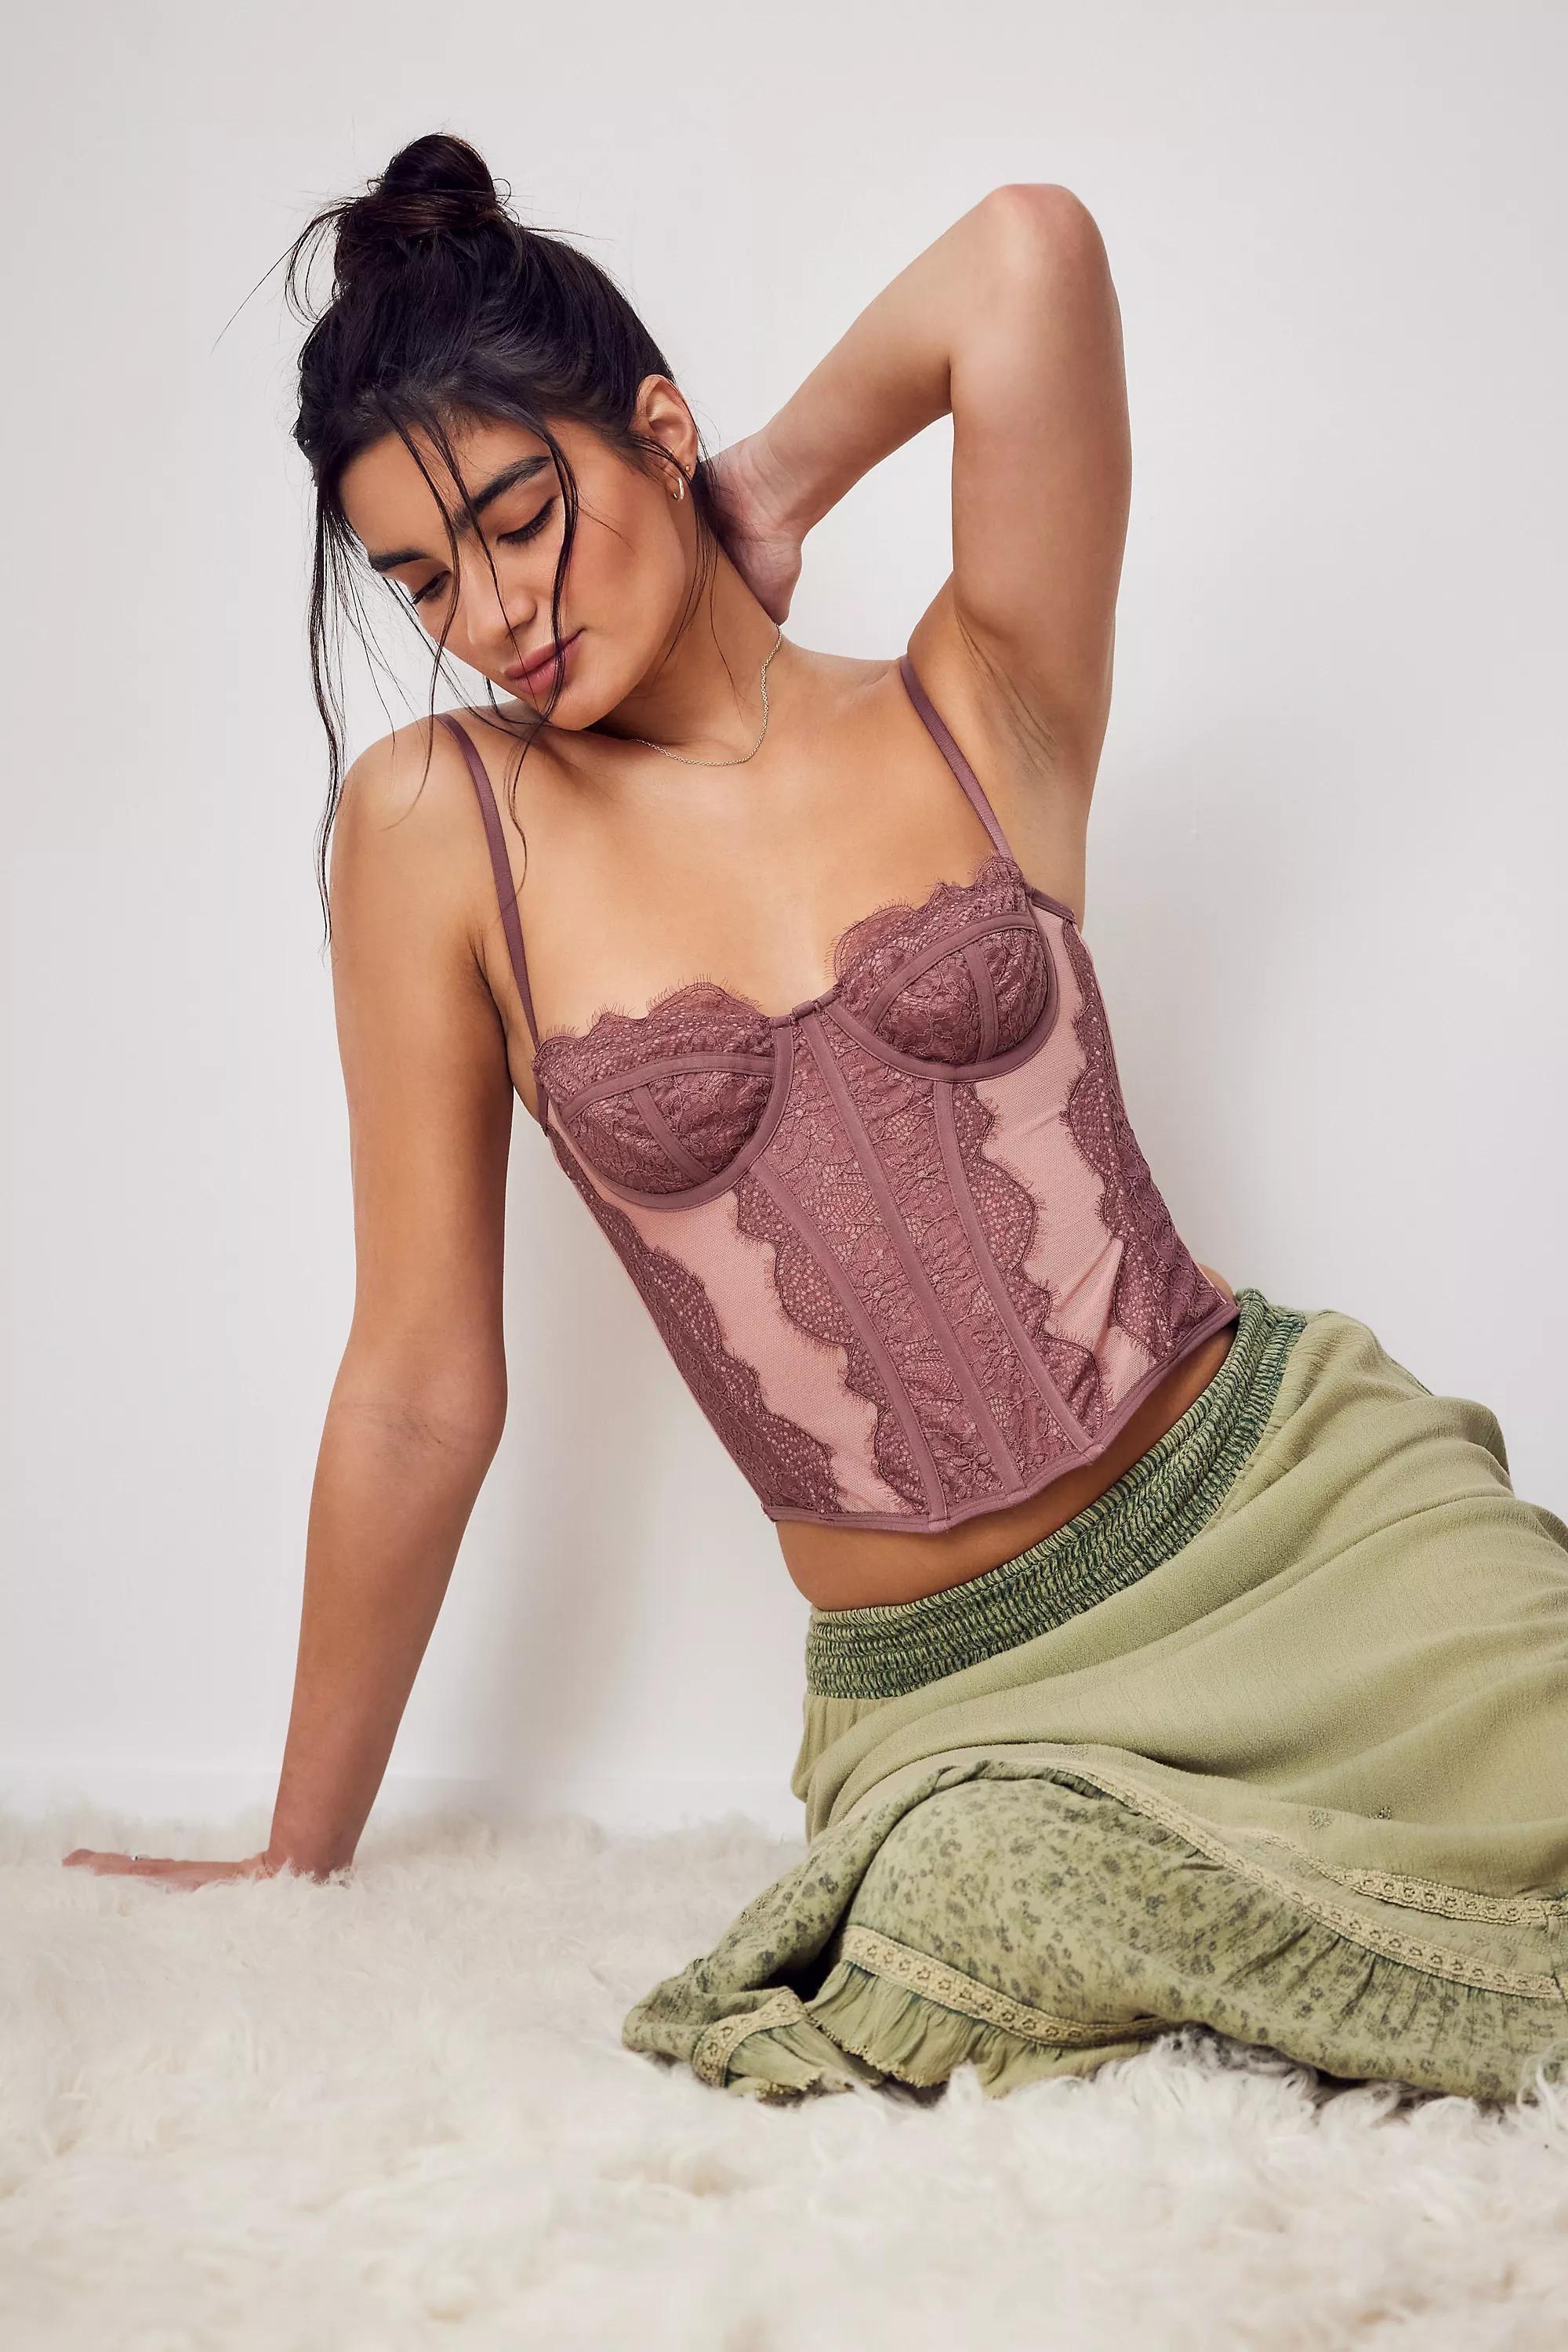 BDG Urban Outfitters Modern Love Corset Top